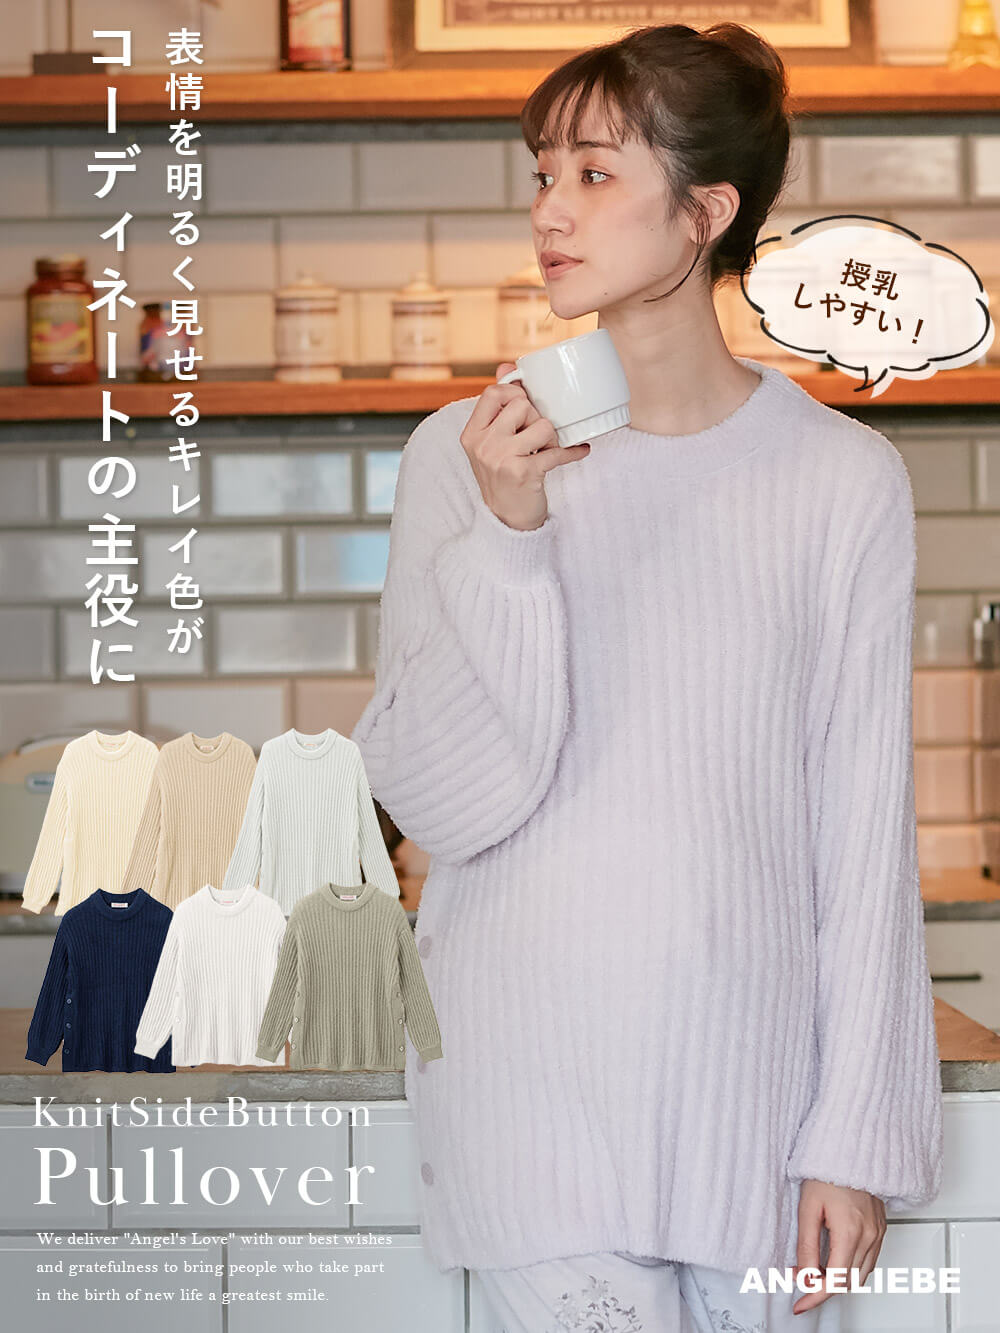  maternity clothes nursing clothes soft knitted side button pull over .... clothes go in . put on pyjamas production . put on lady's room wear .... tops 